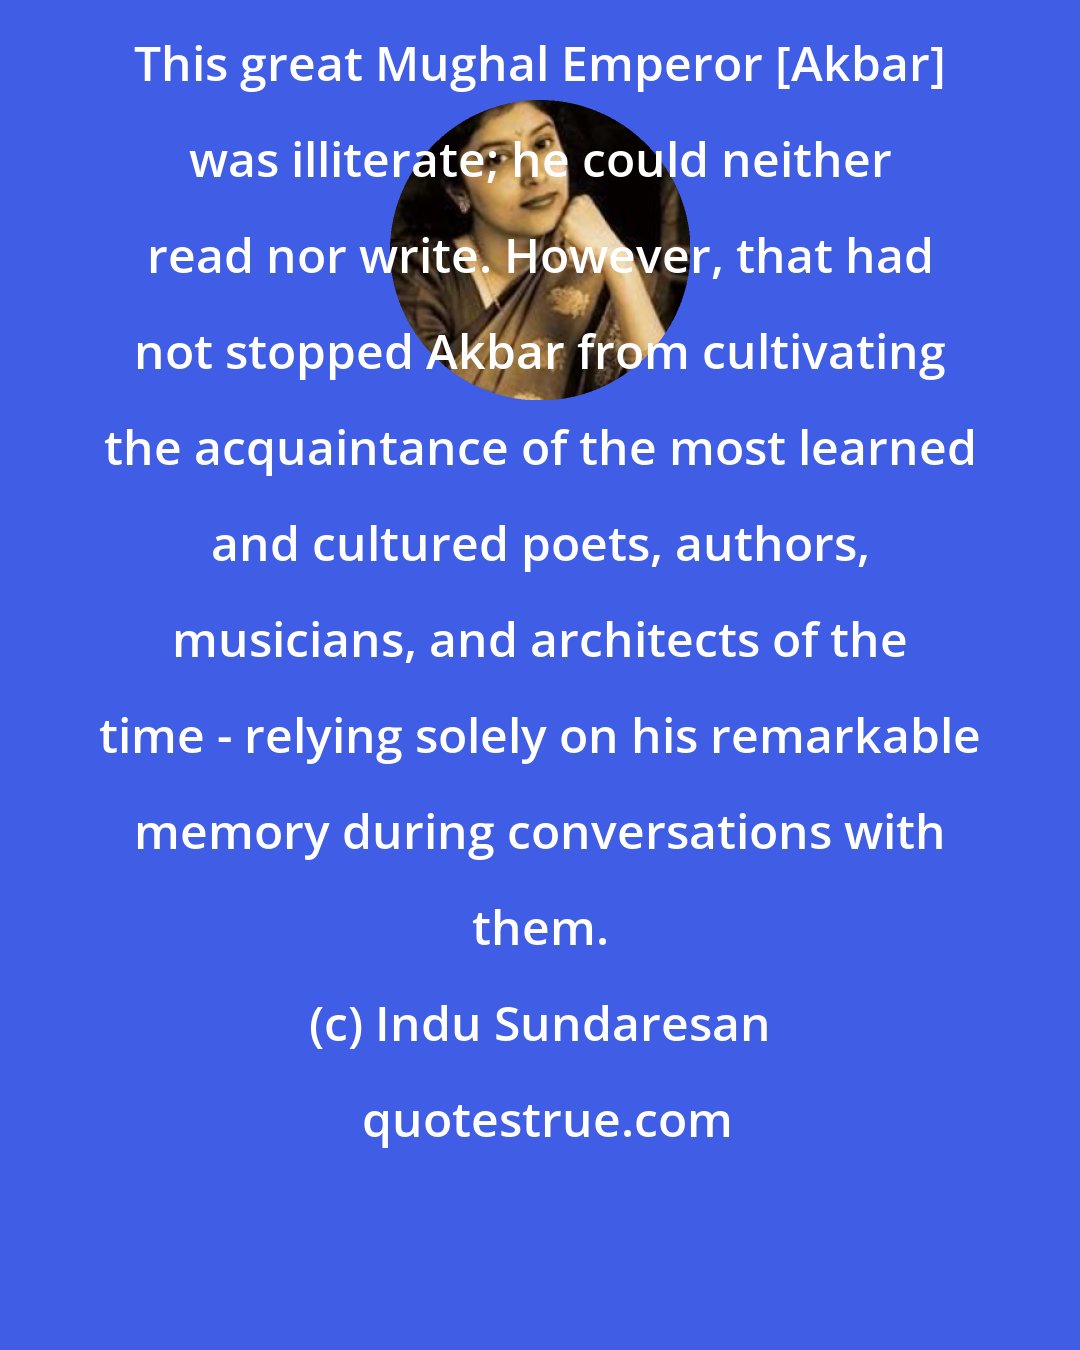 Indu Sundaresan: This great Mughal Emperor [Akbar] was illiterate; he could neither read nor write. However, that had not stopped Akbar from cultivating the acquaintance of the most learned and cultured poets, authors, musicians, and architects of the time - relying solely on his remarkable memory during conversations with them.